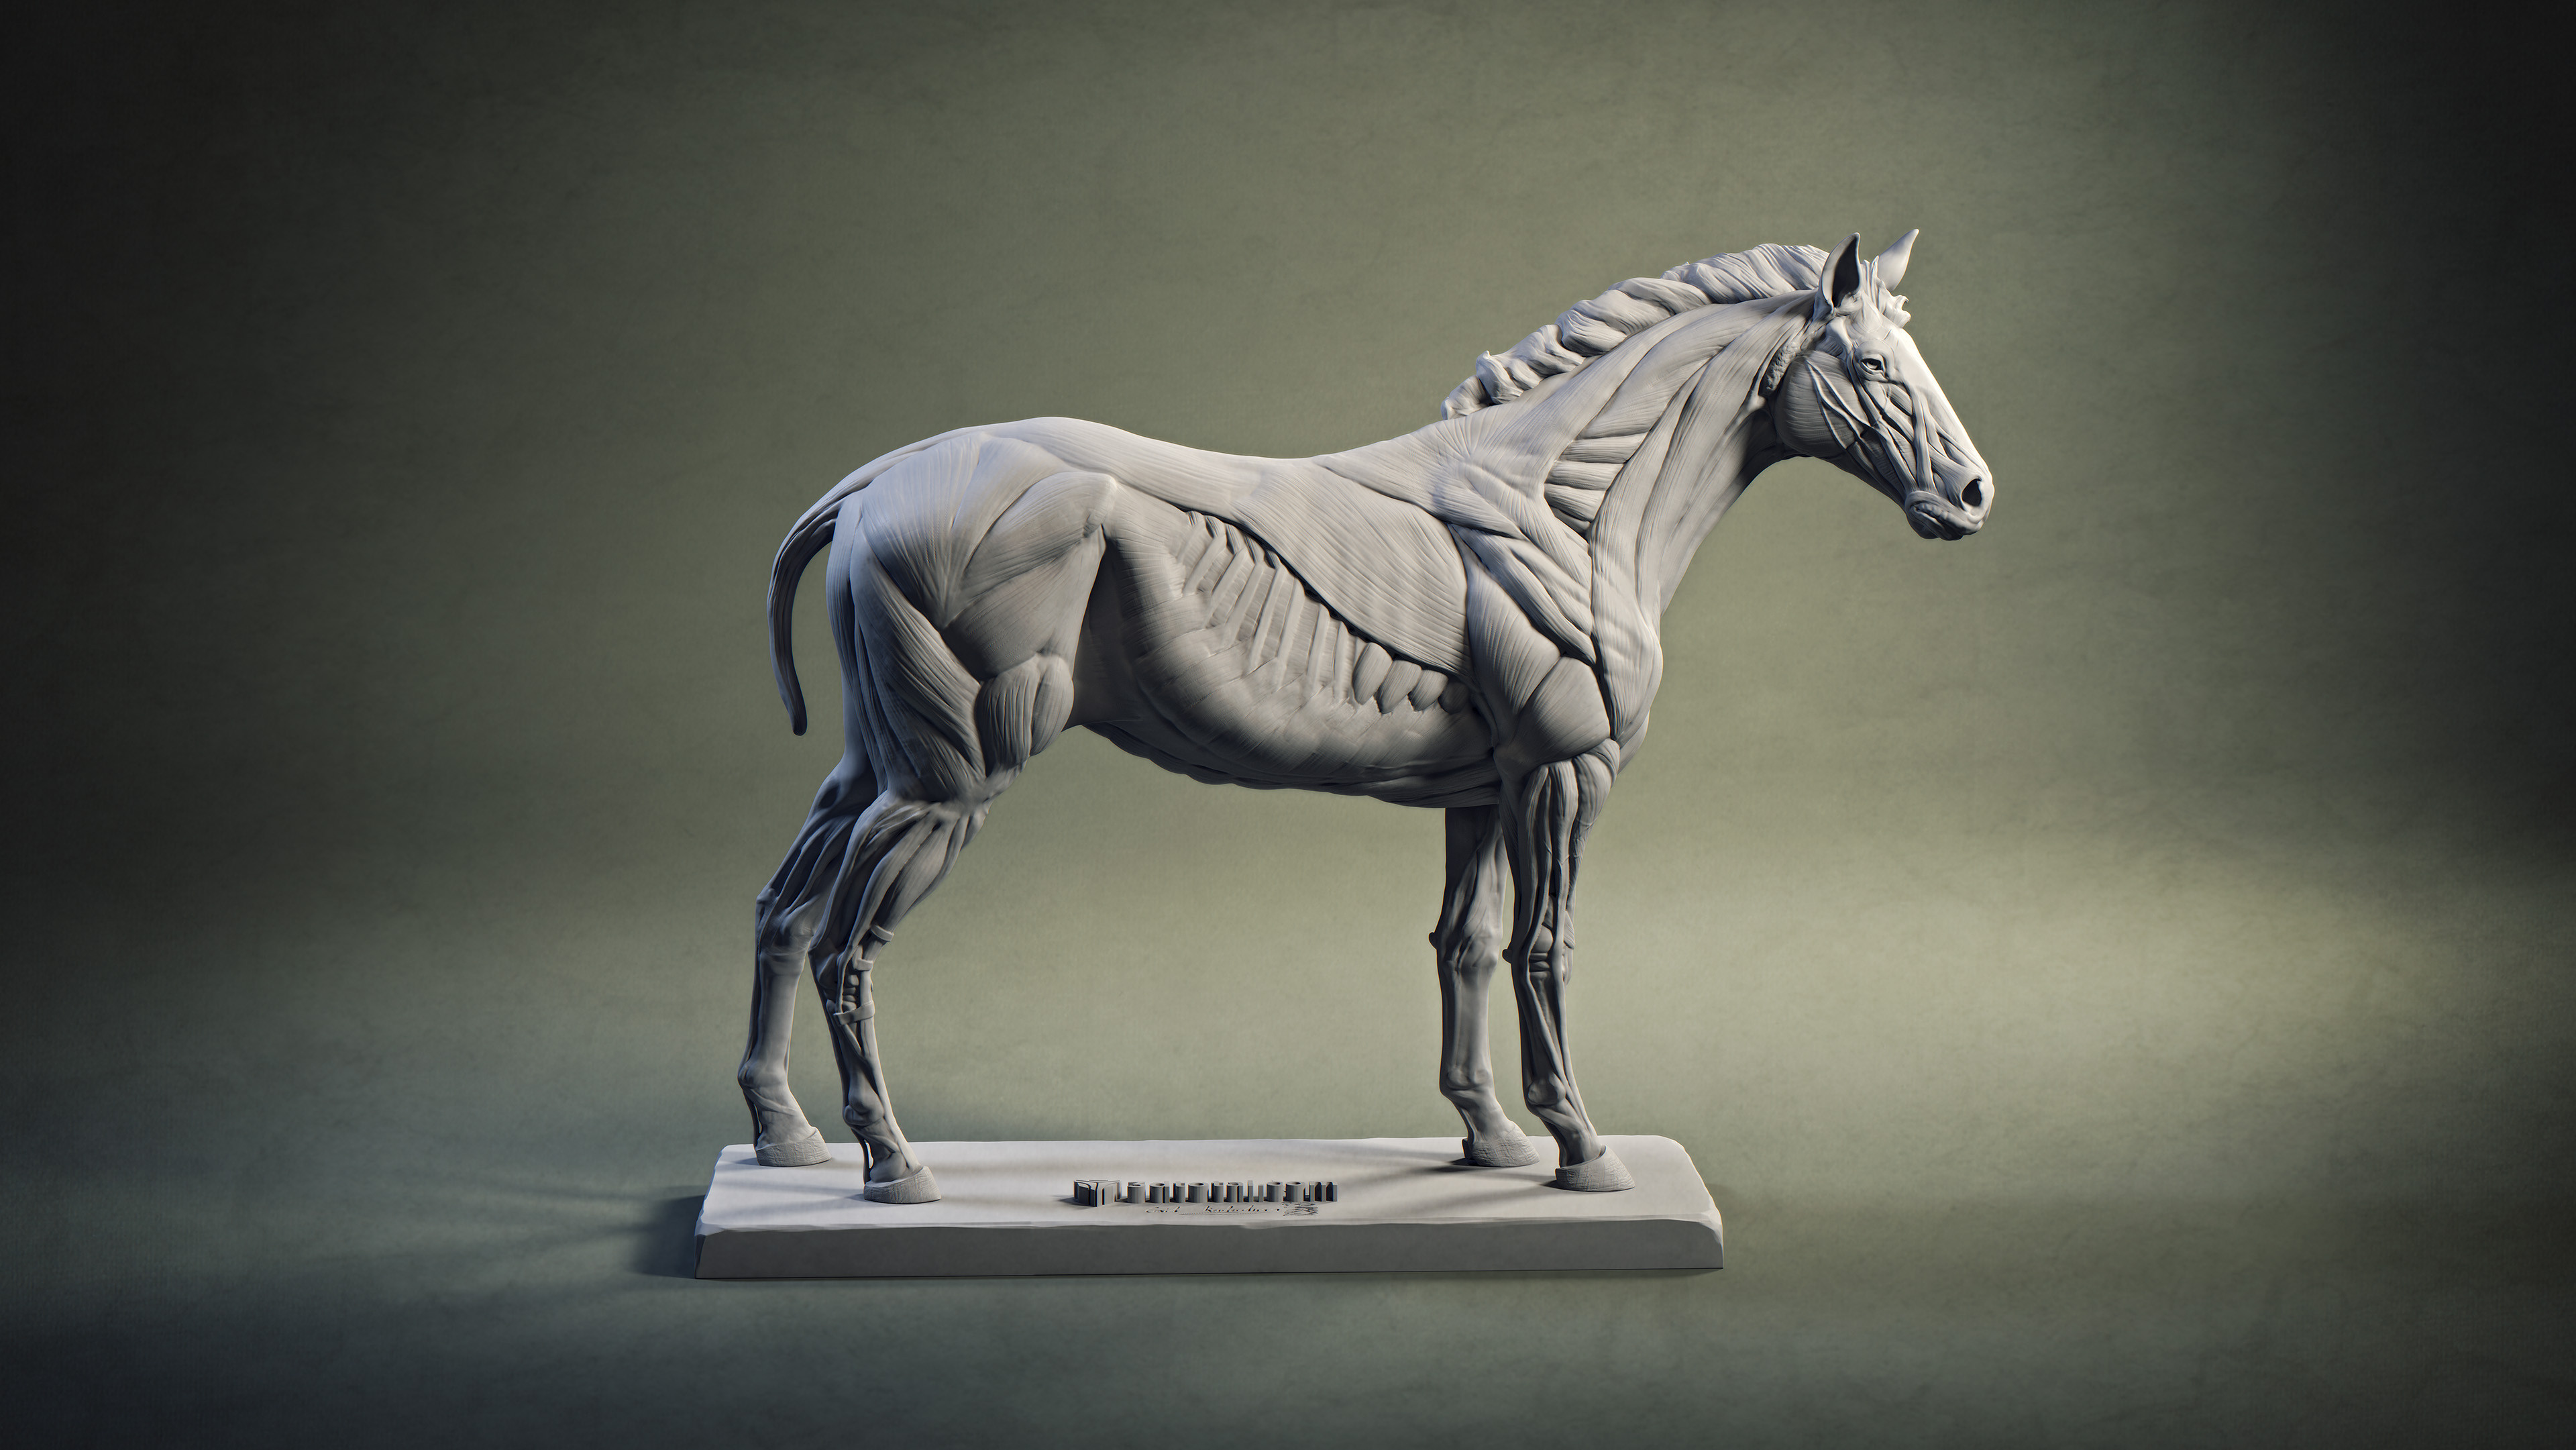 Quarter horse - Render I did for the Postcard. Made with Maya and Arnold.